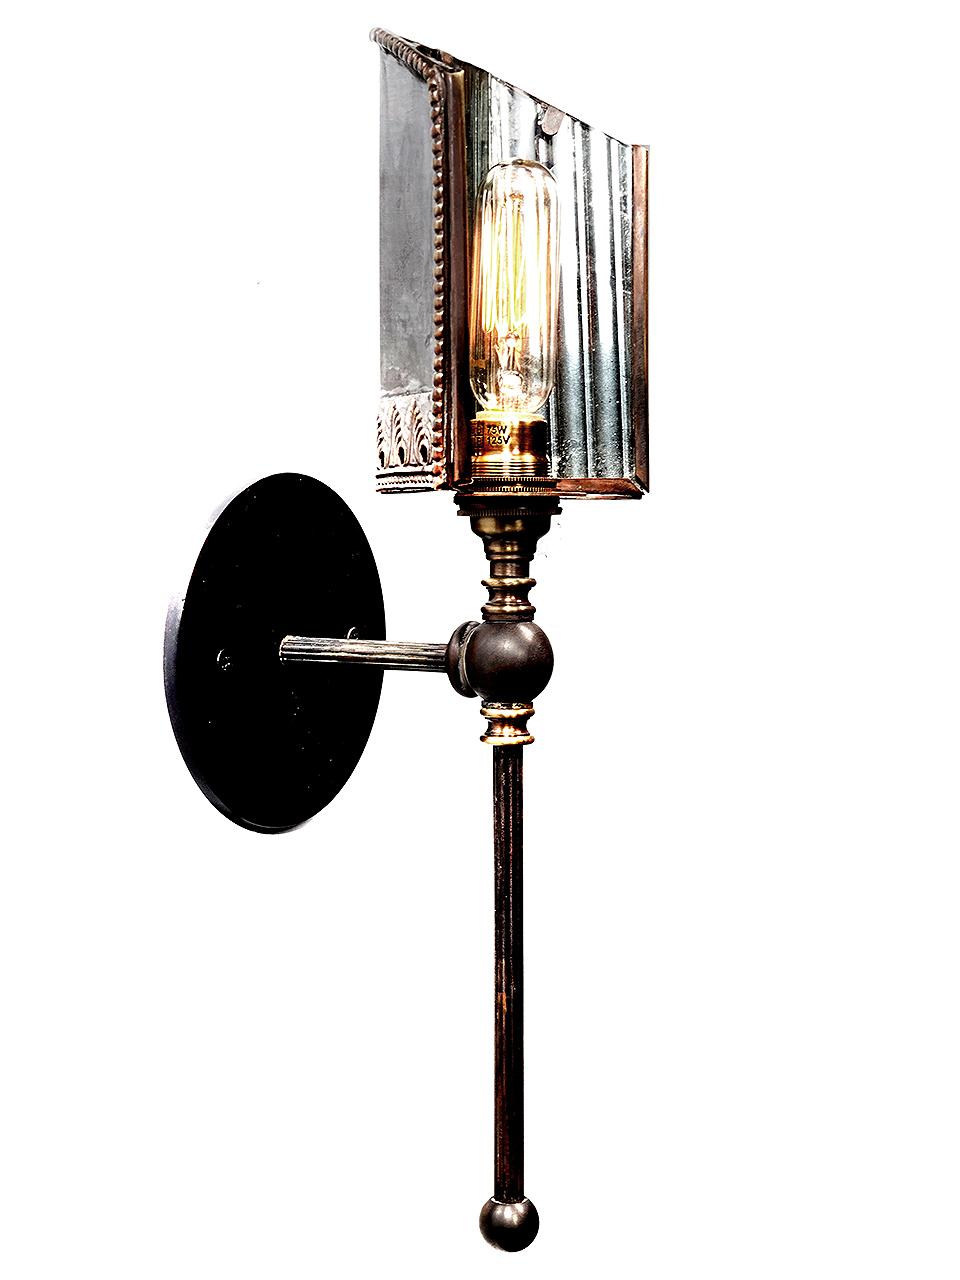 This is a rich looking sconce with out being too decorative. It has a simple and elegant. The shade has 3 fluted reflector mirrors often found on early 20th-Century lamps manufactured by the Frink Lighting Company. The brass shades also have a